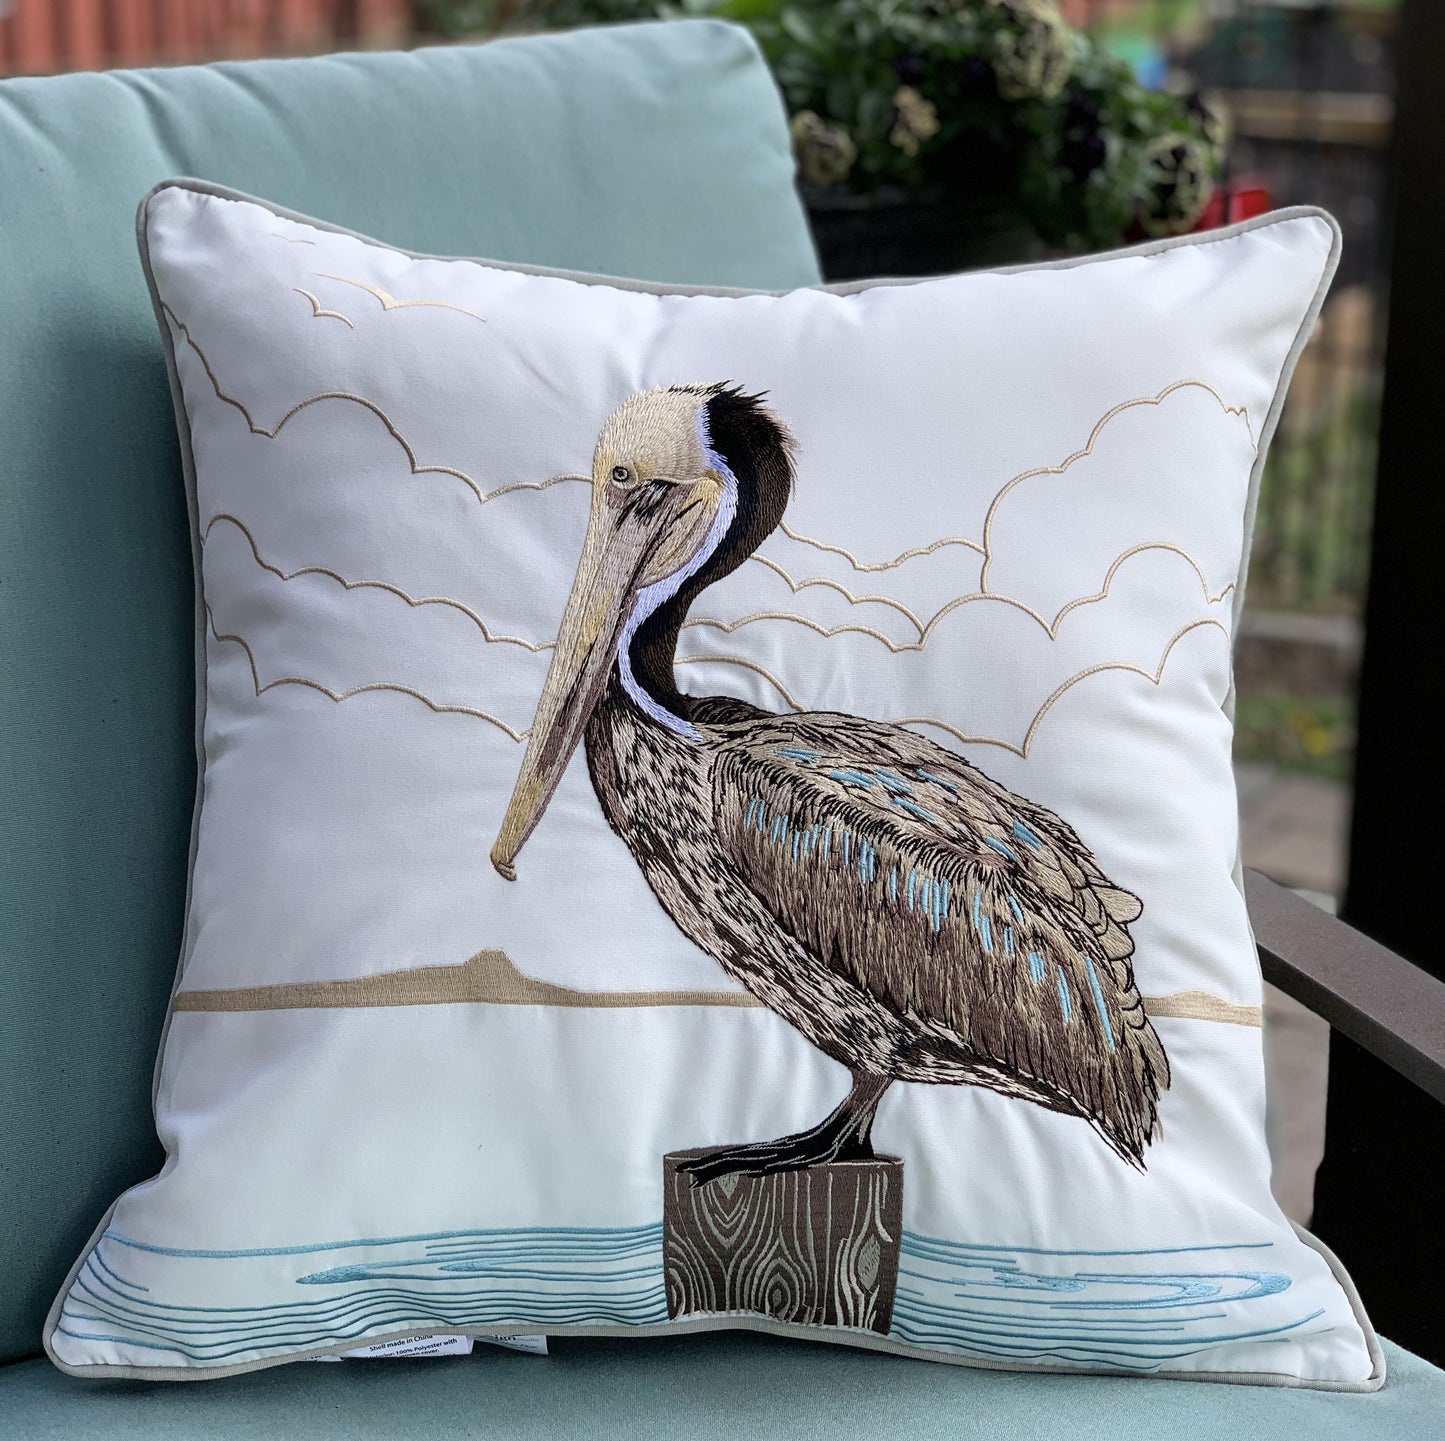 Sunbathing Brown Pelican Indoor Outdoor Pillow styled on a patio chair.